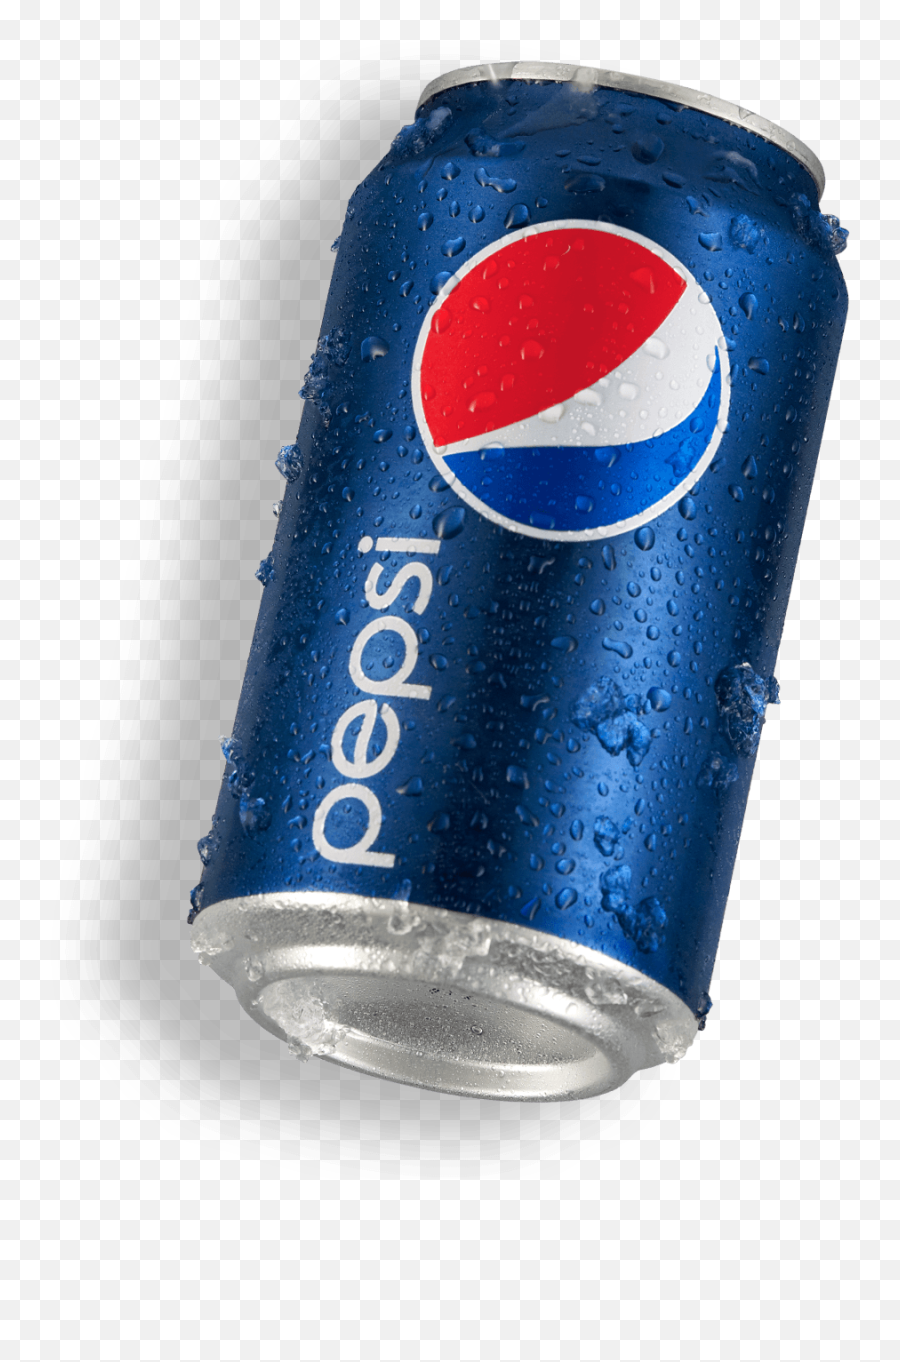 Download Pepsi Can Png Image With - Pepsi Transparent,Pepsi Can Transparent Background